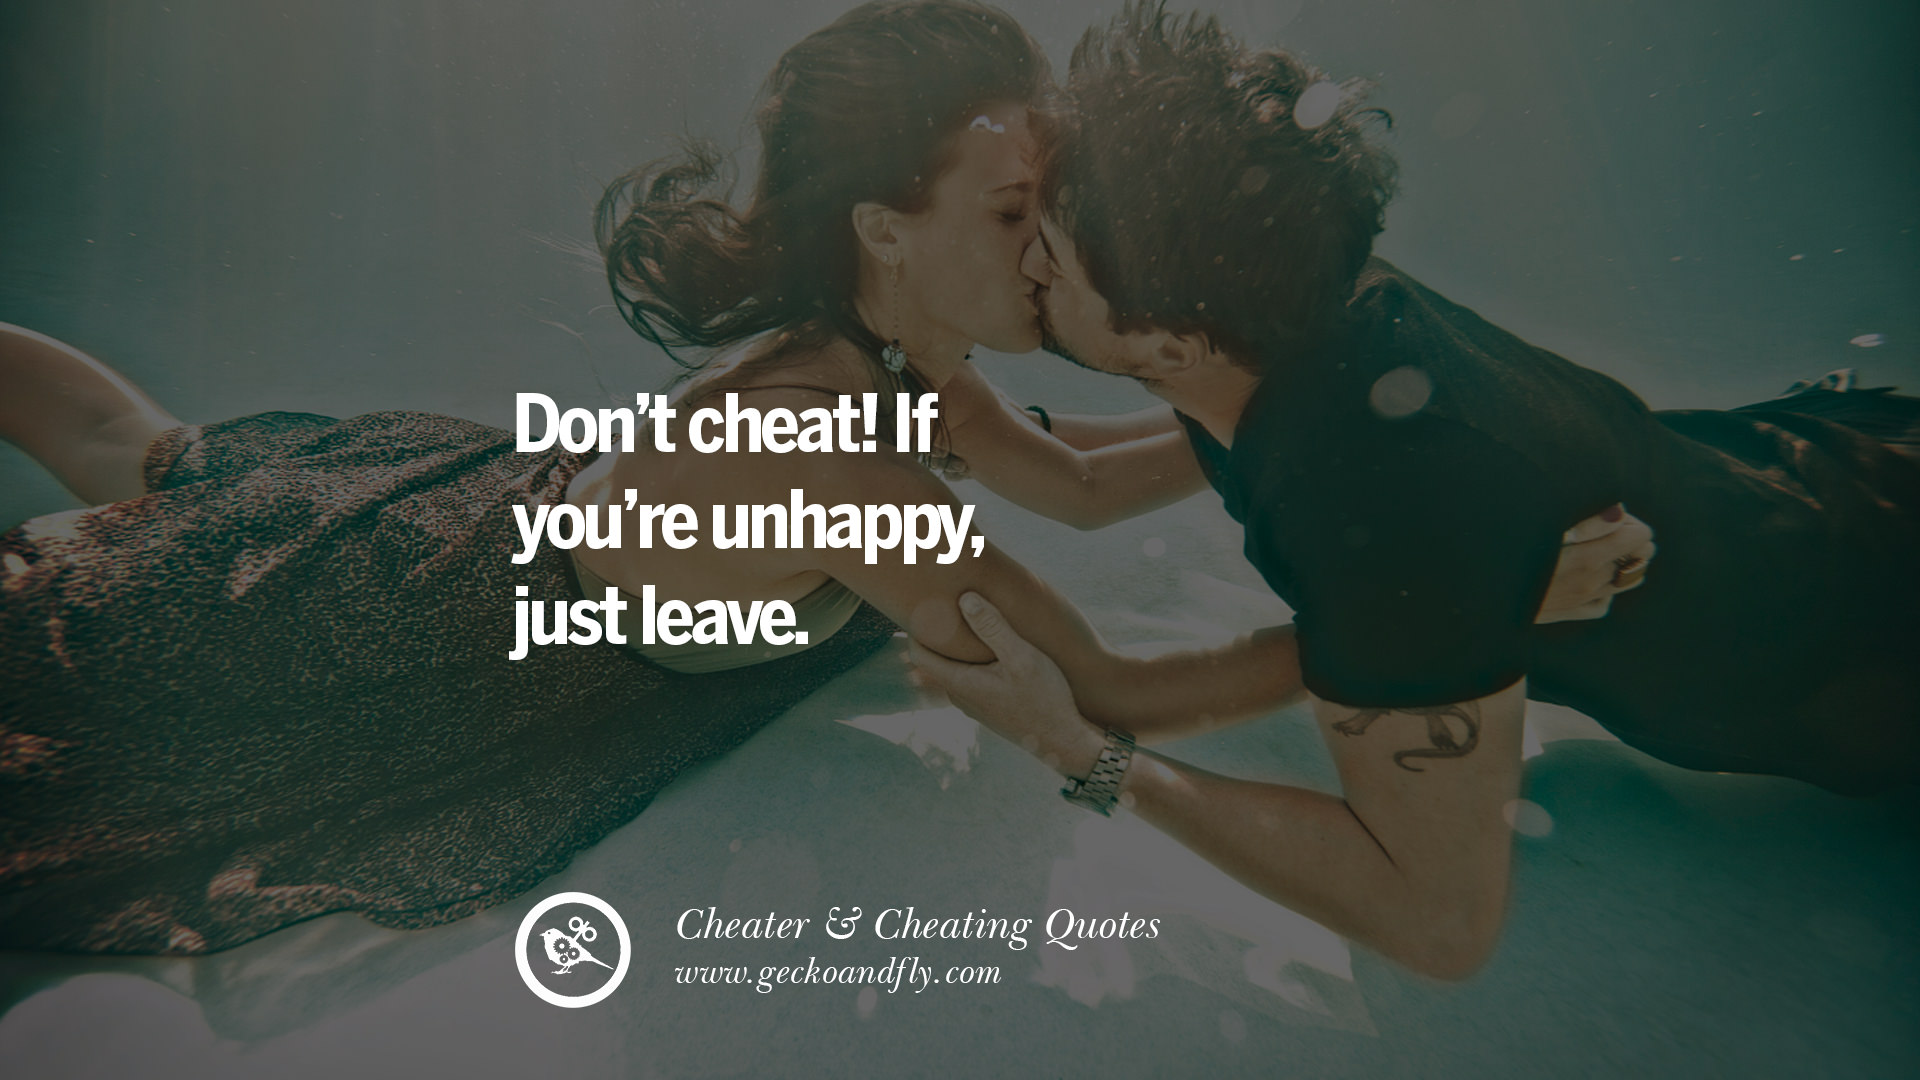 60 Quotes On Cheating Boyfriend And Lying Husband